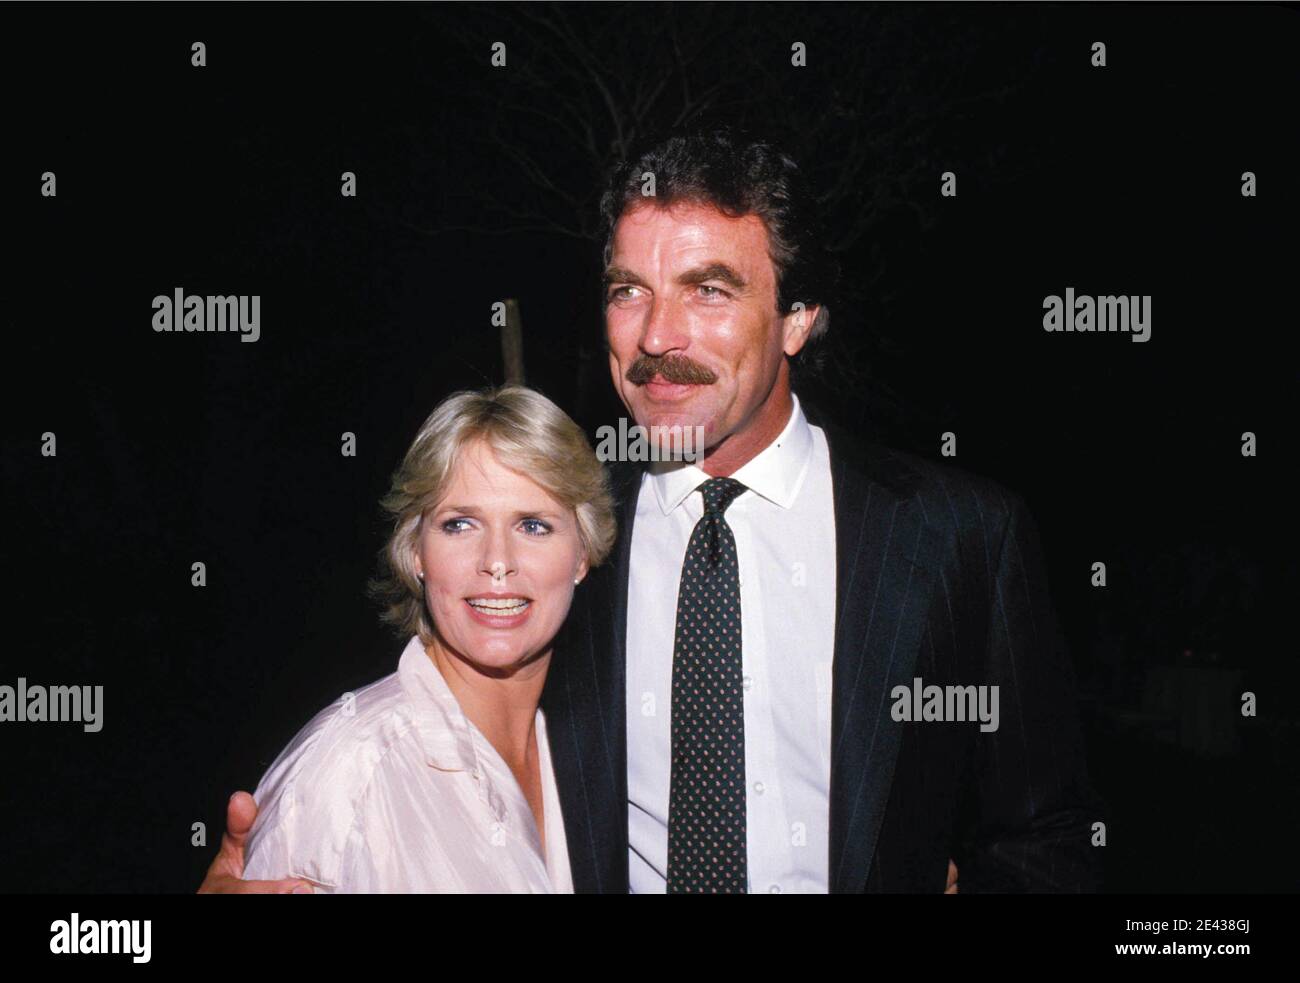 Tom Selleck And Sharon Gless 1987 Credit: Ralph Dominguez/MediaPunch ...